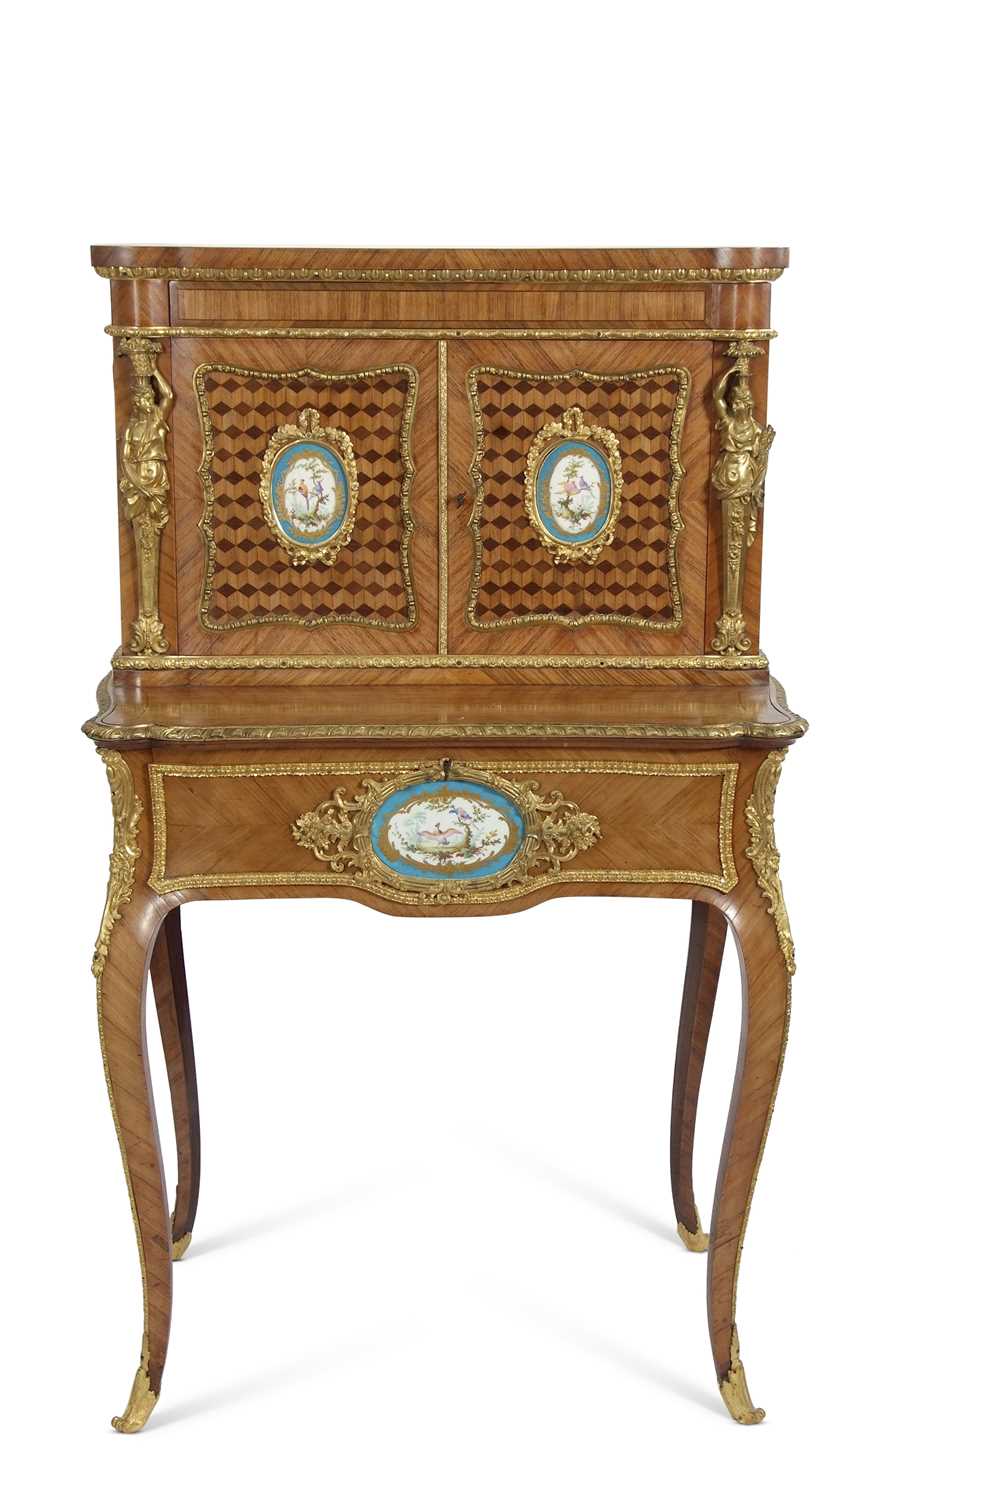 A French walnut porcelain and ormolu desk with two panelled doors to the top over a base with single - Image 2 of 16